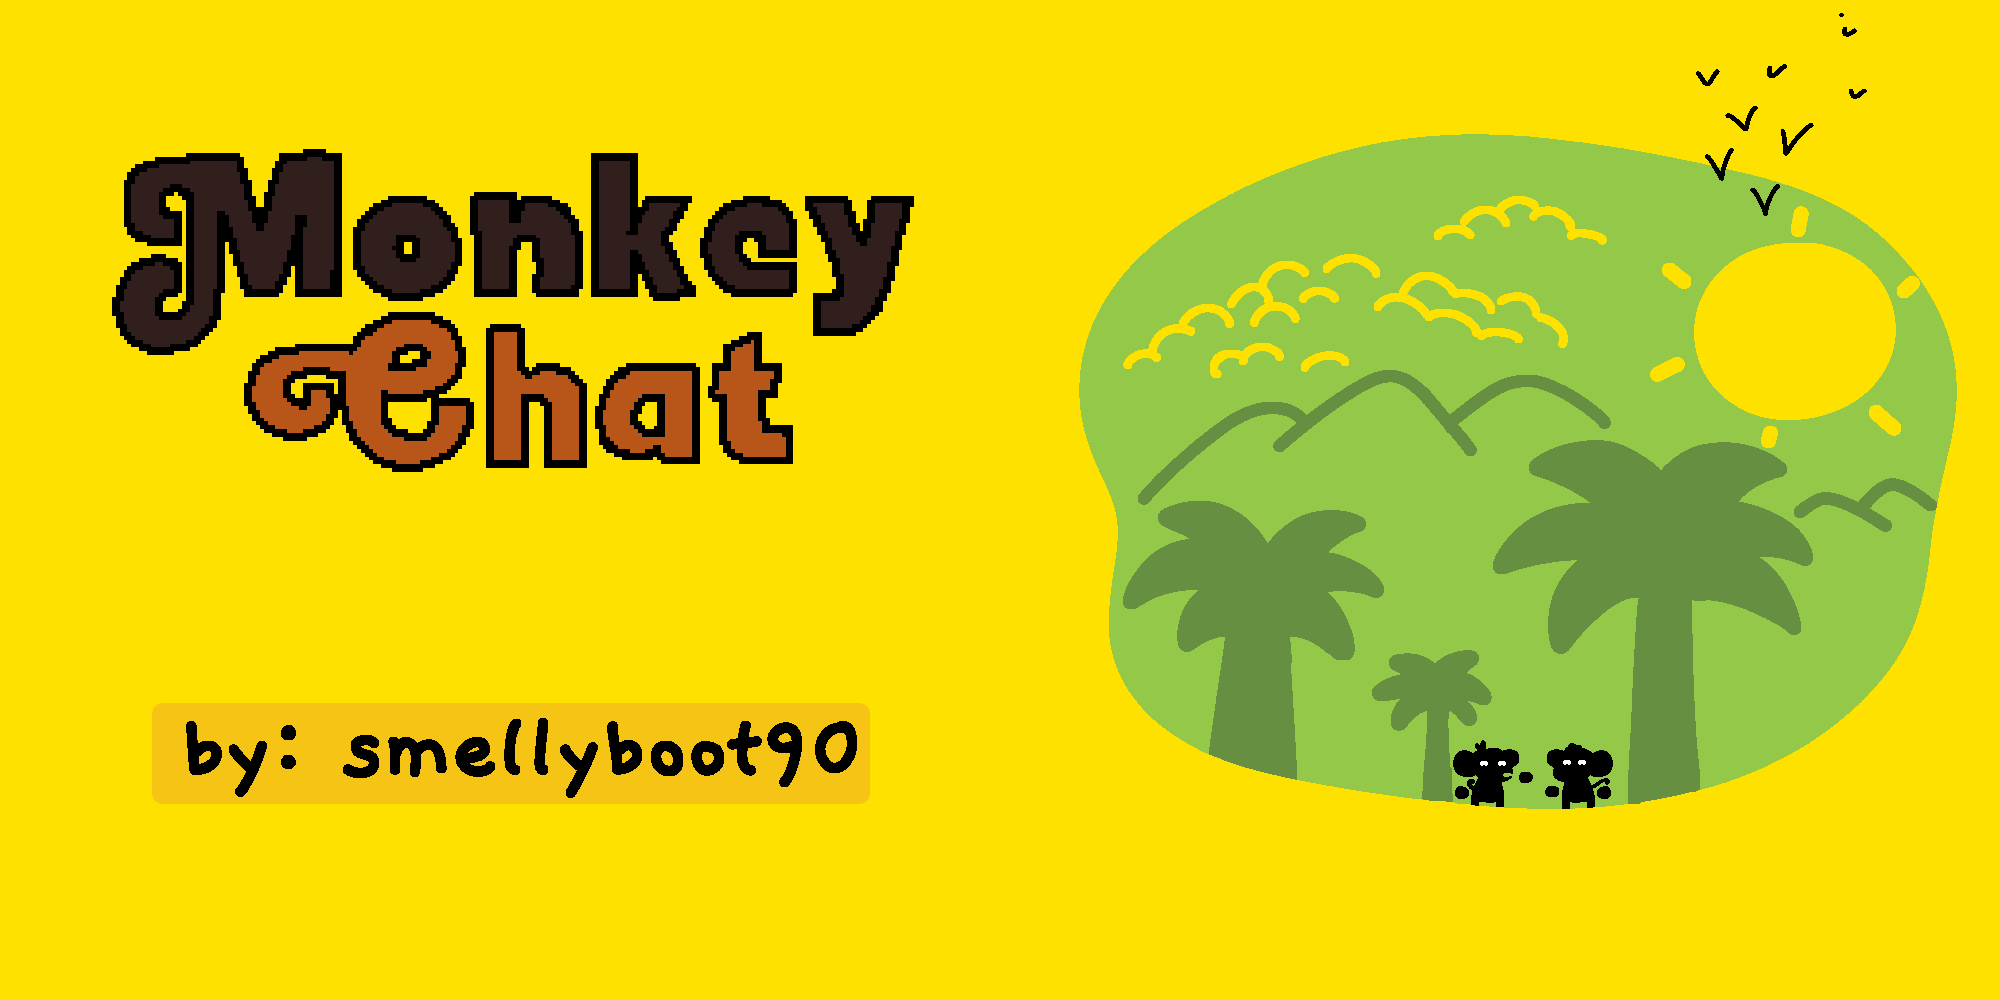 The logo for monkey chat